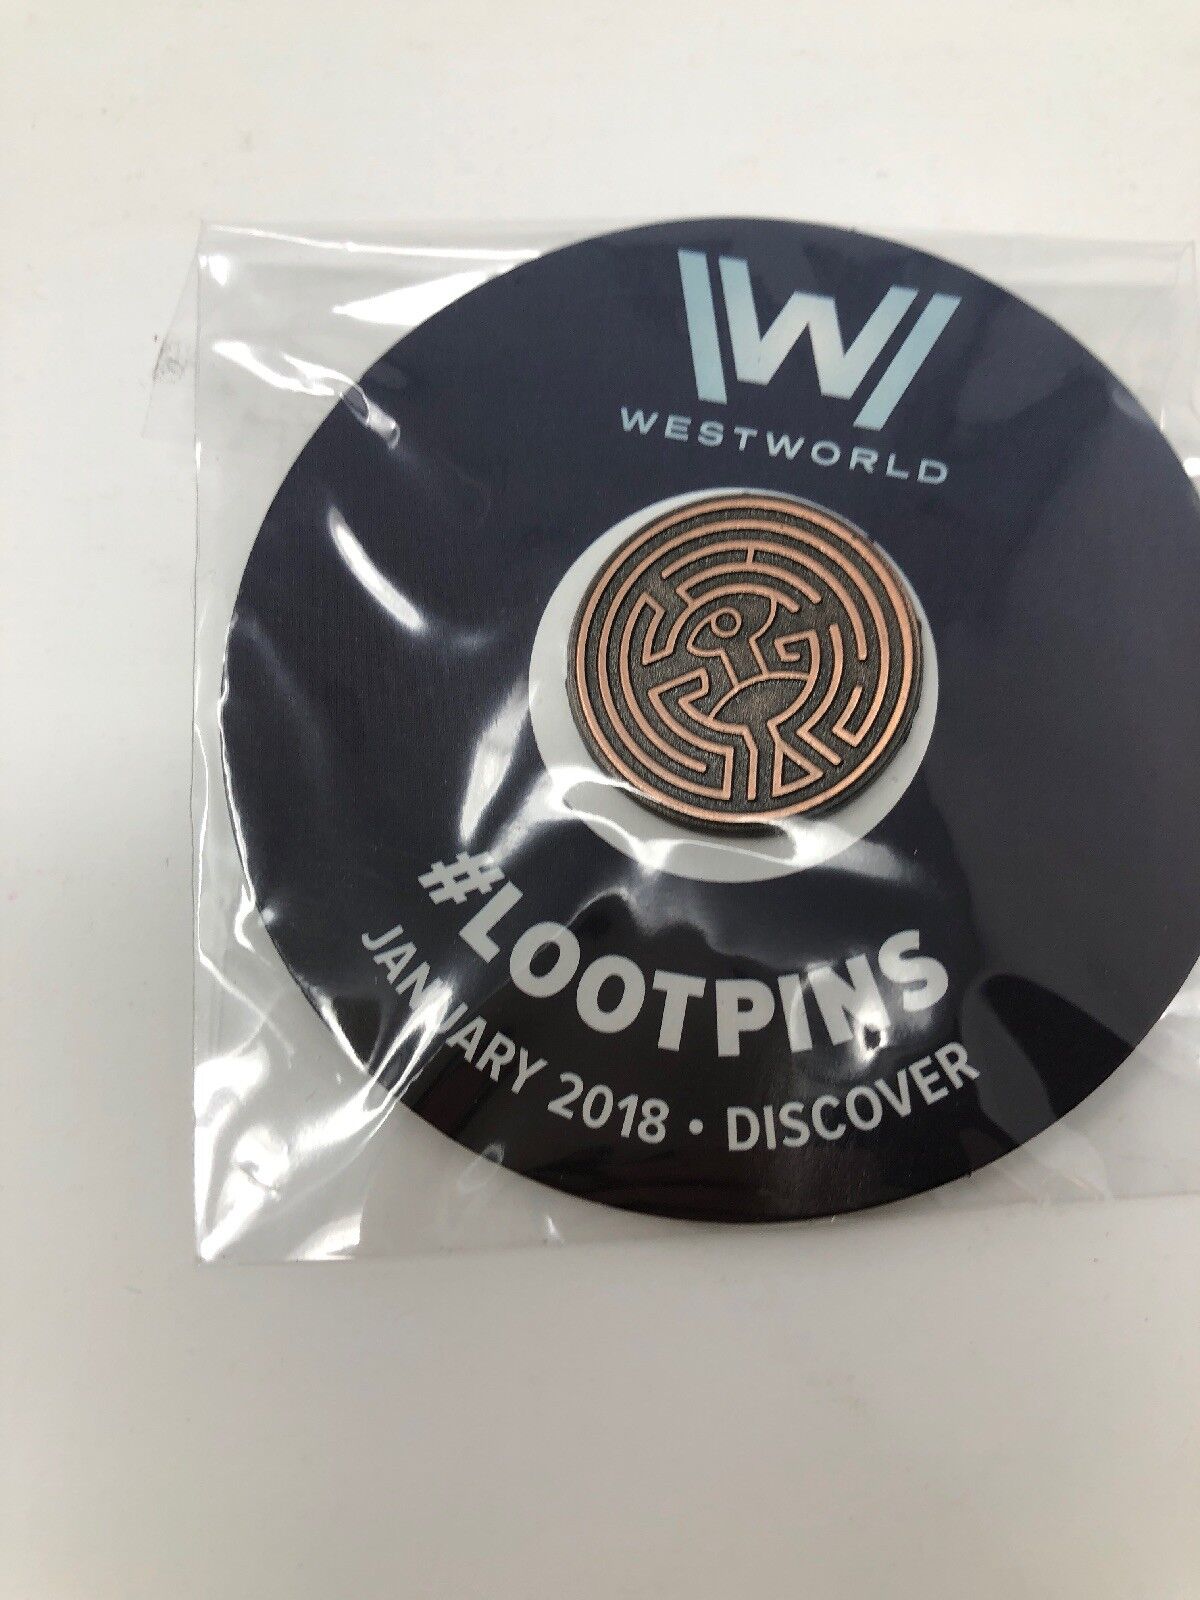 Lootpins January 2018 Discover Westworld Lootcrate Exclusive 